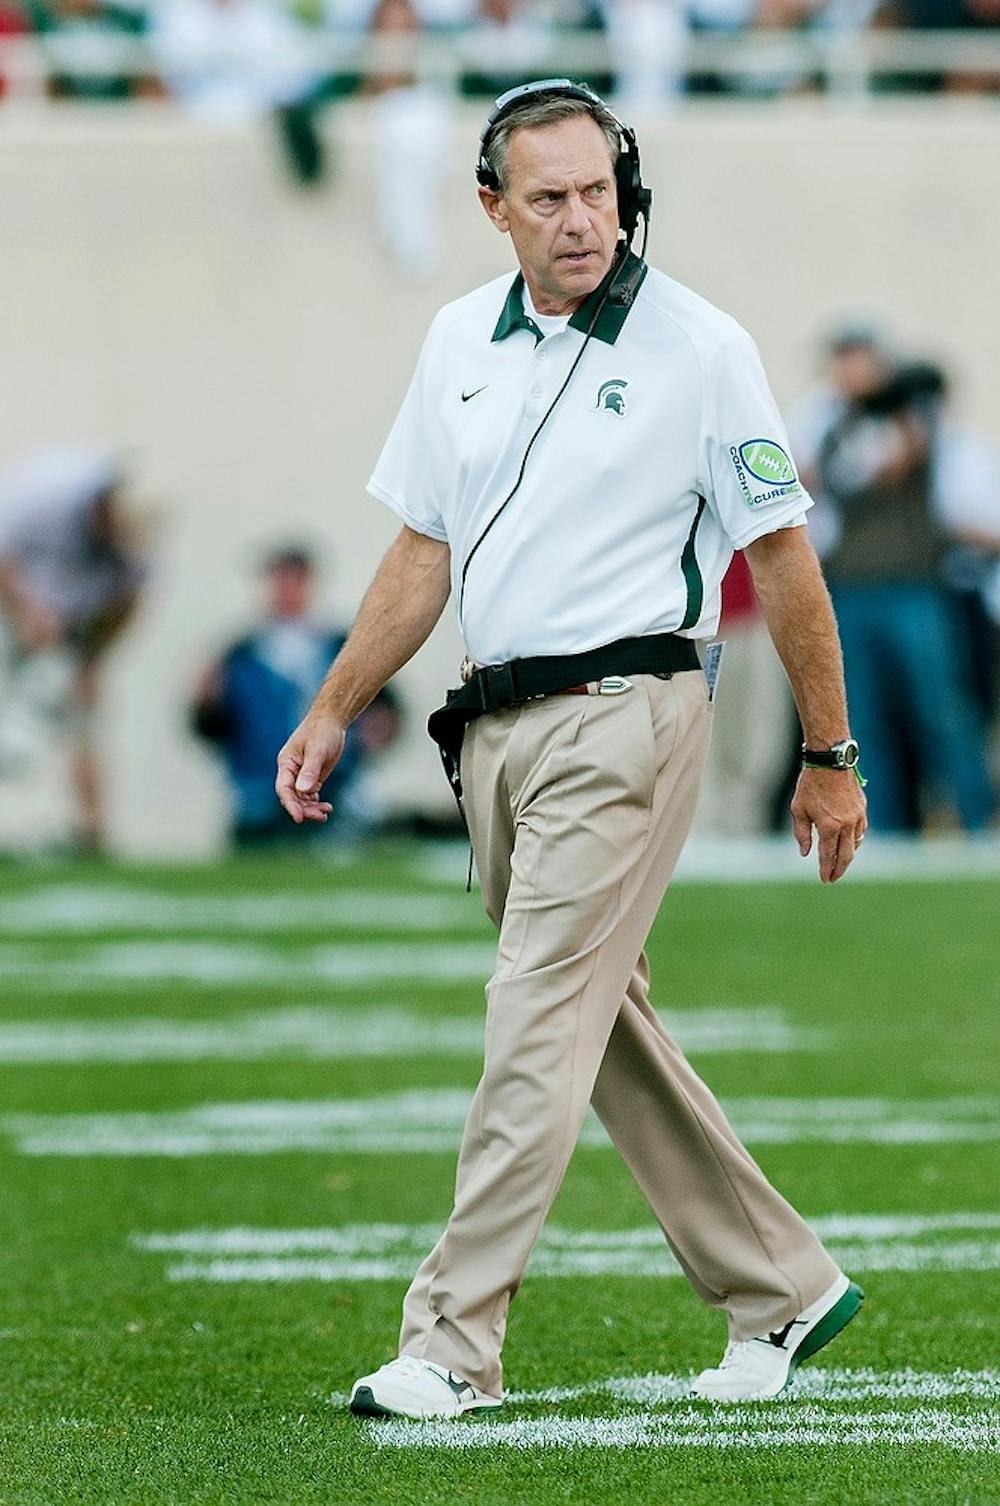 <p>Spartans head coach Mark Dantonio walks off the field after an MSU timeout during the Ohio State game on Saturday afternoon, Sept. 29, 2012, at Spartan Stadium. The Buckeyes beat the Spartans 17-16. Natalie Kolb/The State News</p>